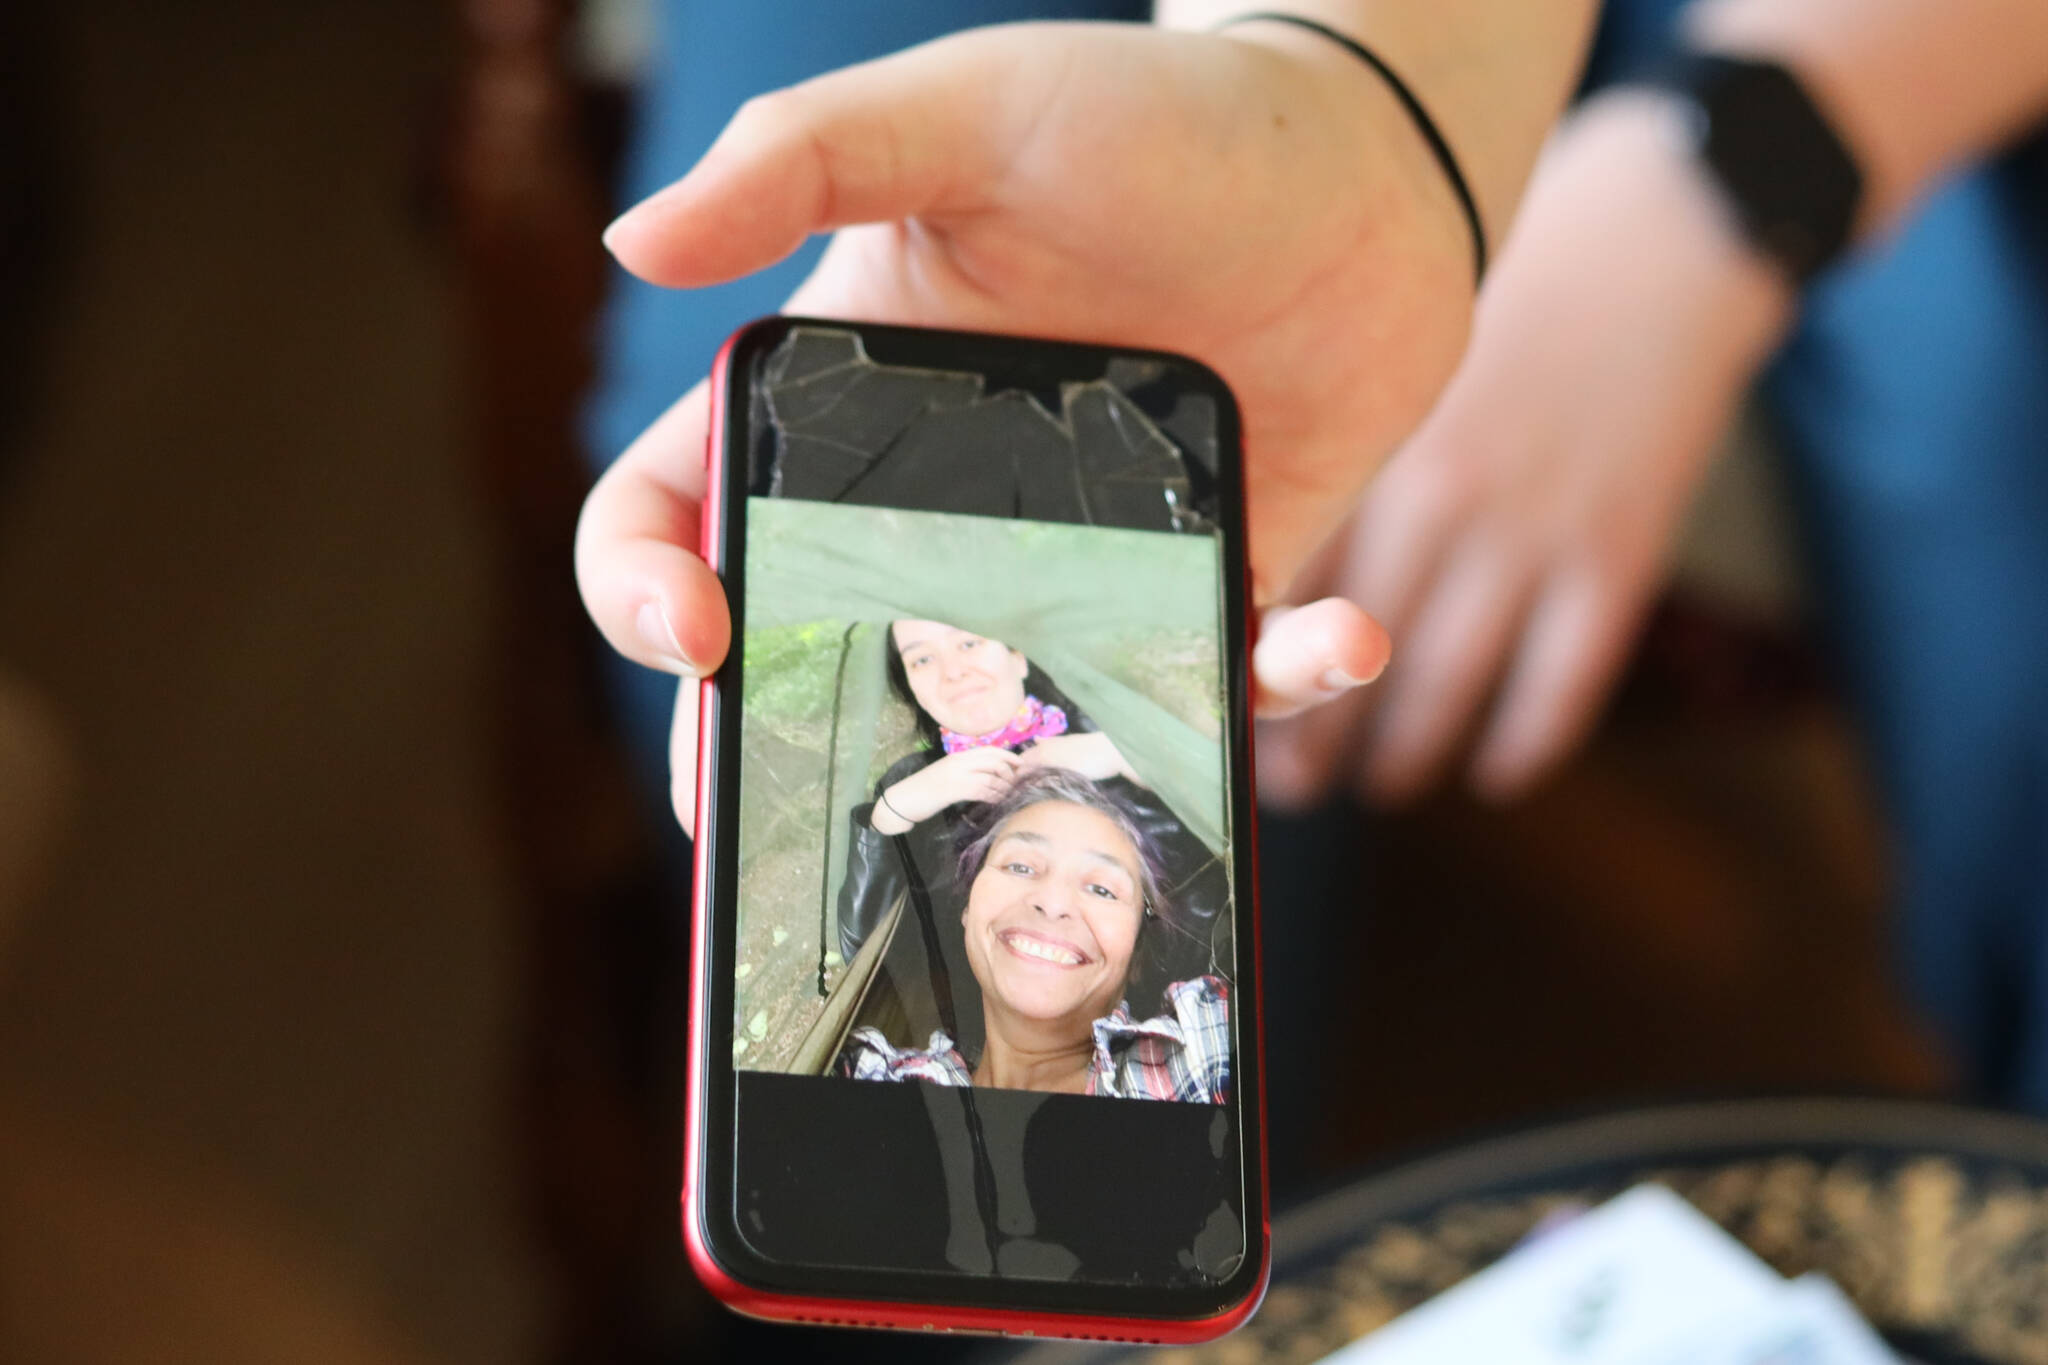 Clarise Larson/ Juneau Empire
Harmony Wentz, Faith Rogers’ daughter, holds out her phone to show a photo of the pair sharing a hammock. According to Juneau Police Department spokesperson Erann Kalwara, authorities are working to identify a suspect responsible for Rogers’ death.